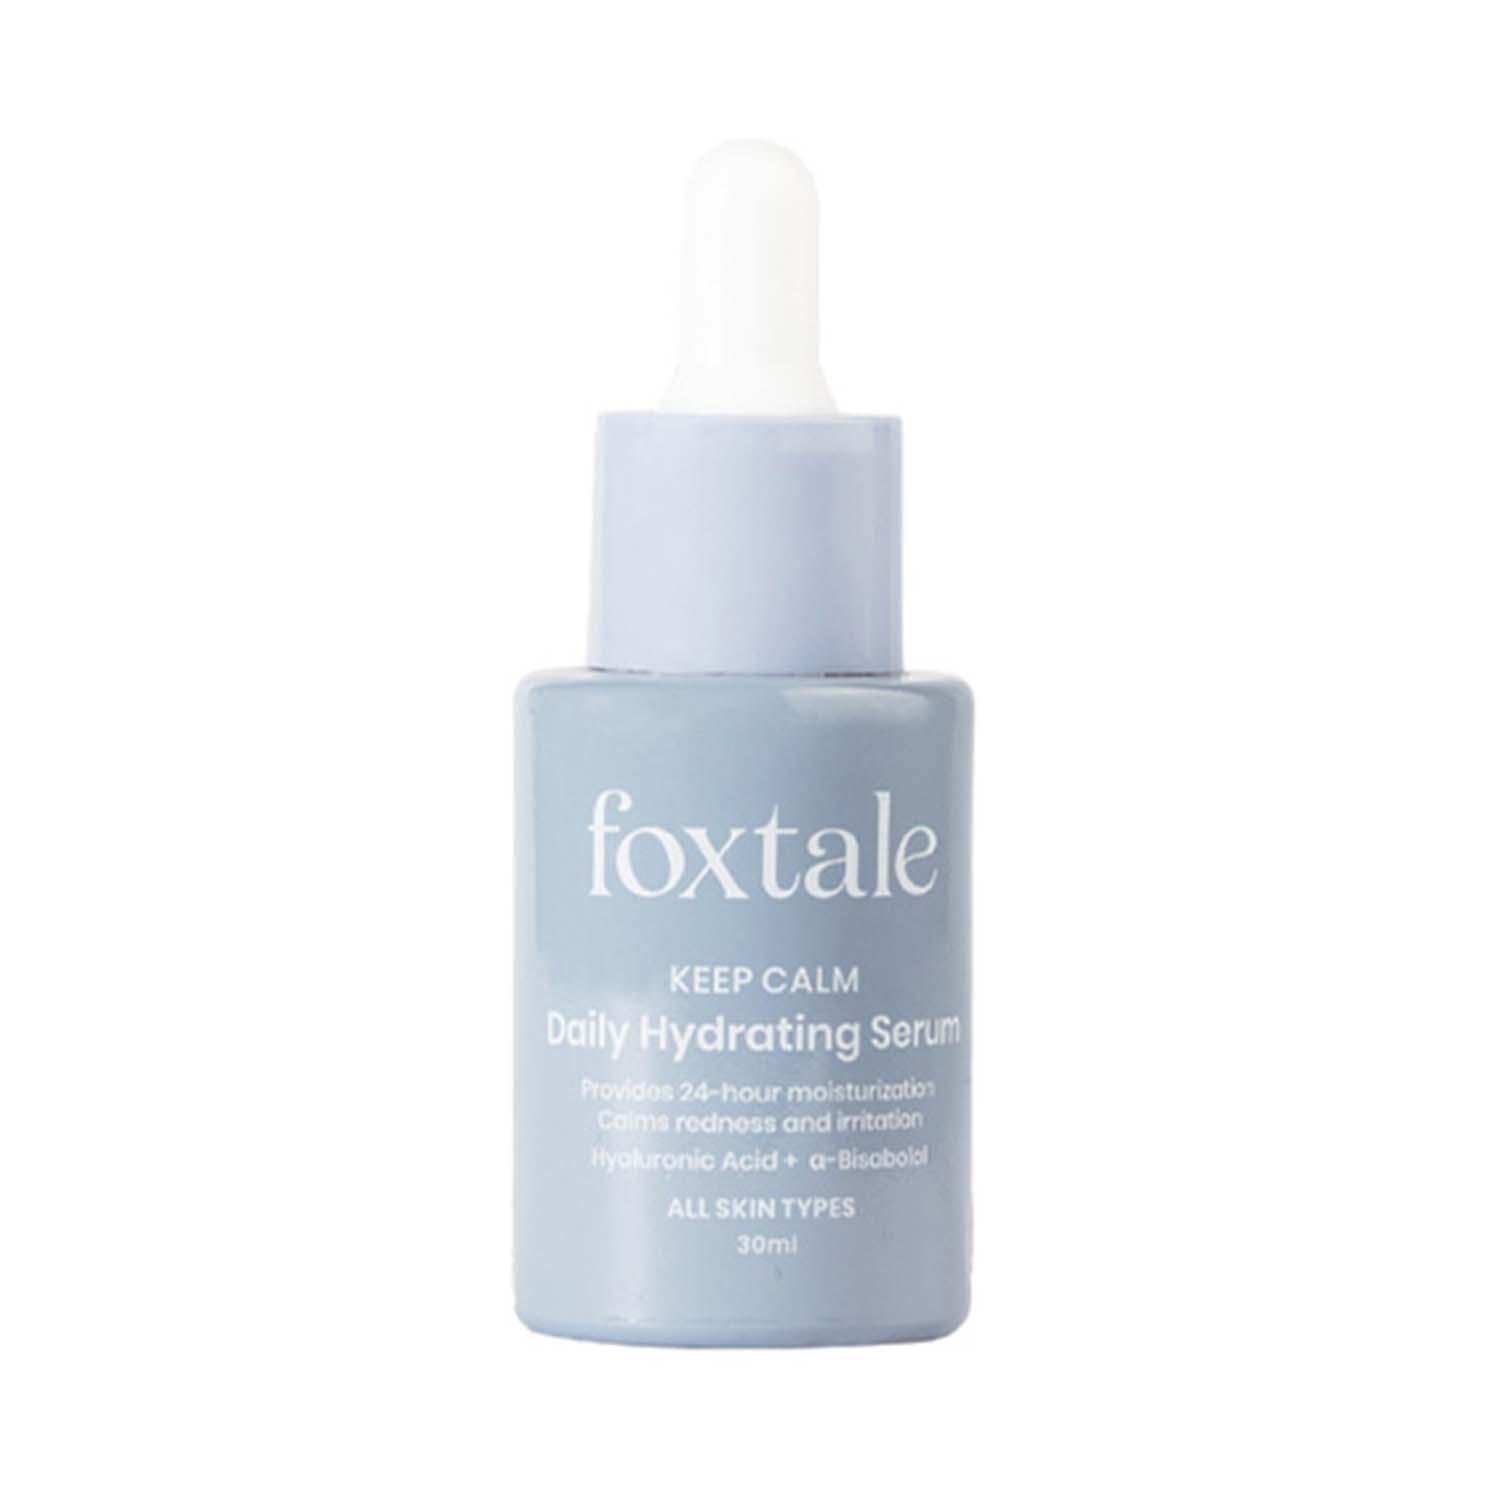 Foxtale | Foxtale Keep Calm Daily Hydrating Serum With Hyaluronic Acid, Aquaporin Boosters (30ml)